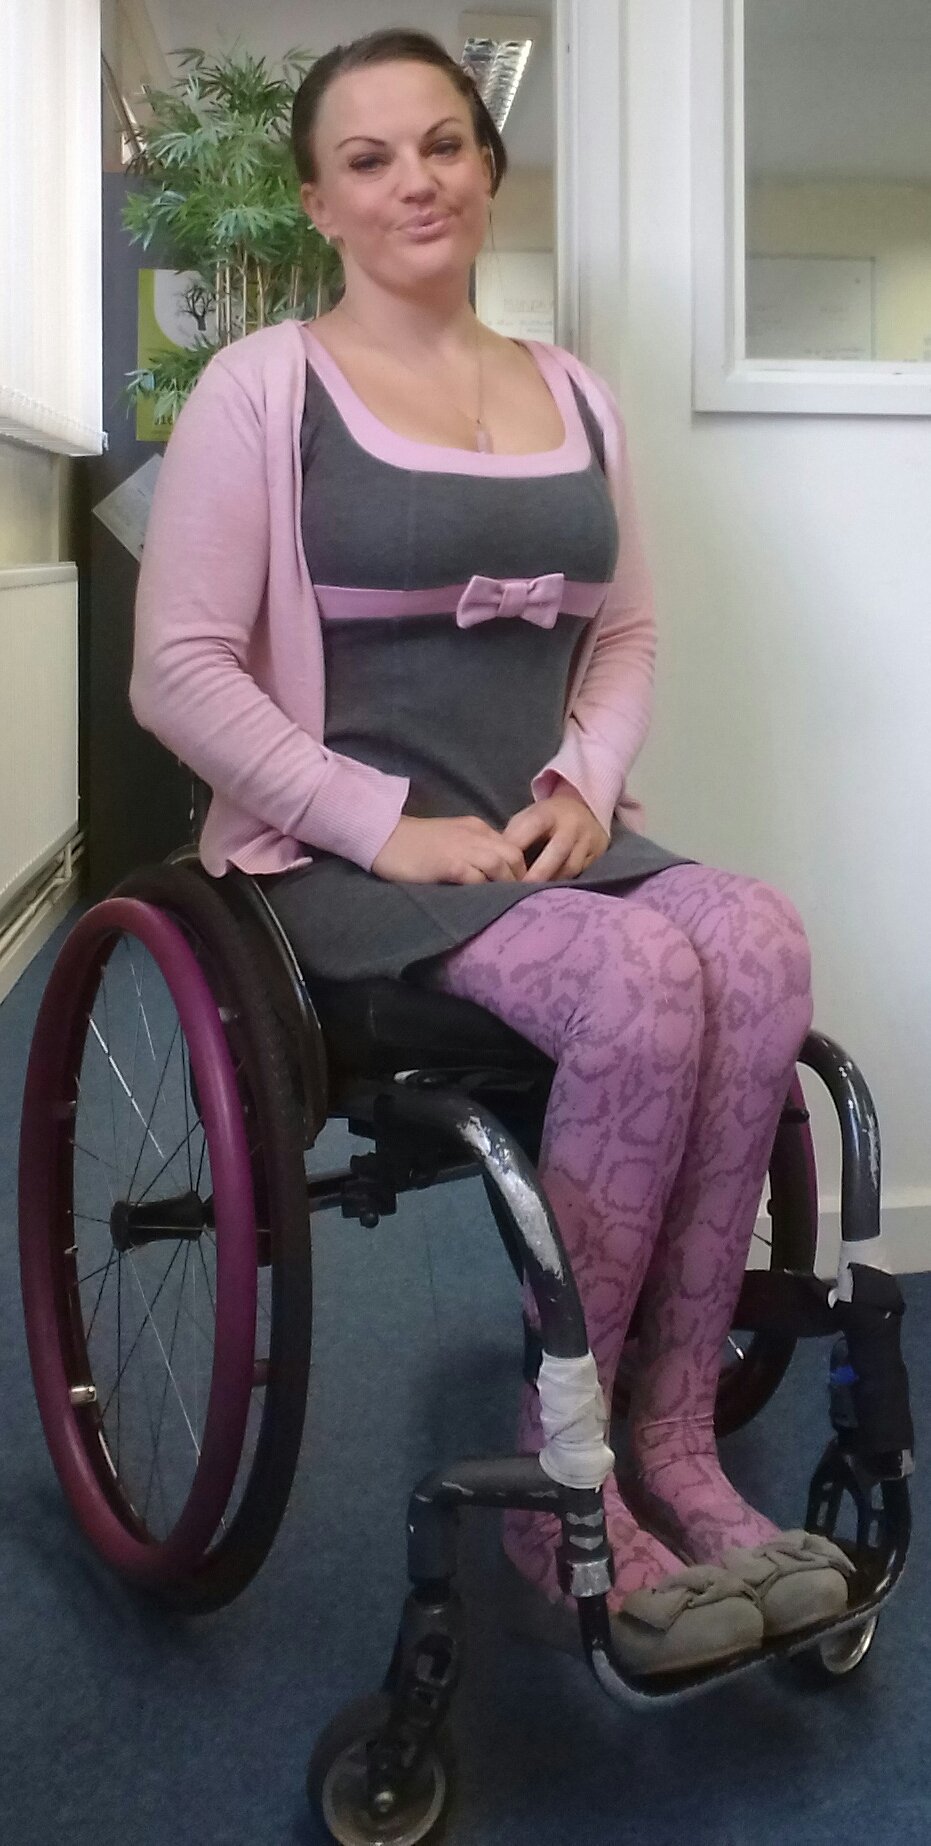 𝗣𝗮𝗿𝗮𝗣𝗿𝗶𝗻𝗰𝗲𝘀𝘀™ on X: #pretty in #pink & #grey with #snakeprint  #tights! #snake #dress #cleavage #wheelchair #disabled #reception  #receptionist #ParaPrincess t.co6kXUsWdIF5  X